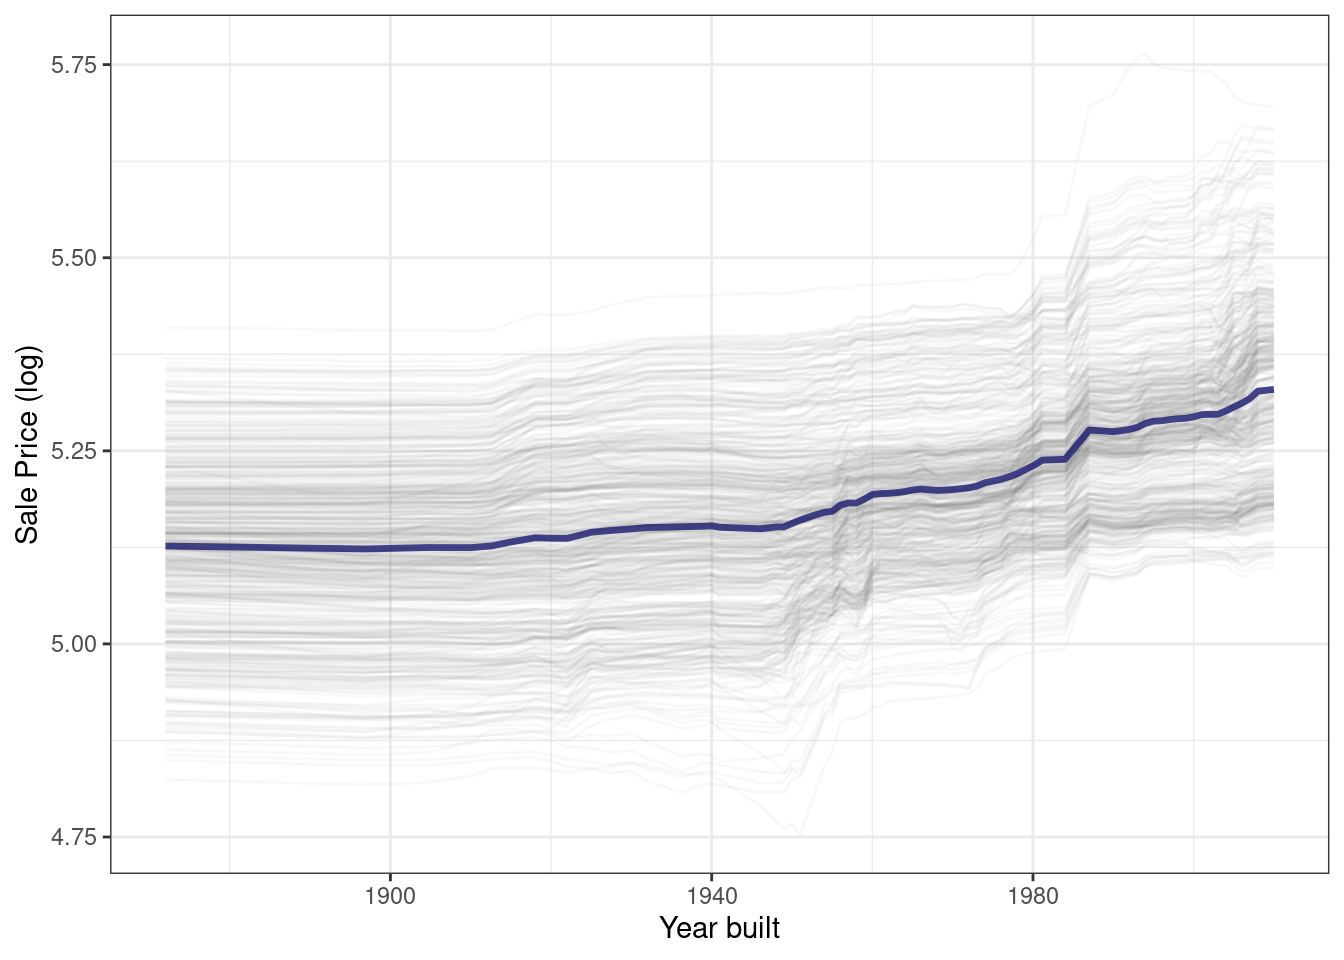 Partial dependence profiles for the random forest model focusing on the year built predictor. The profiles are mostly relatively constant but then increase linearly around 1950.